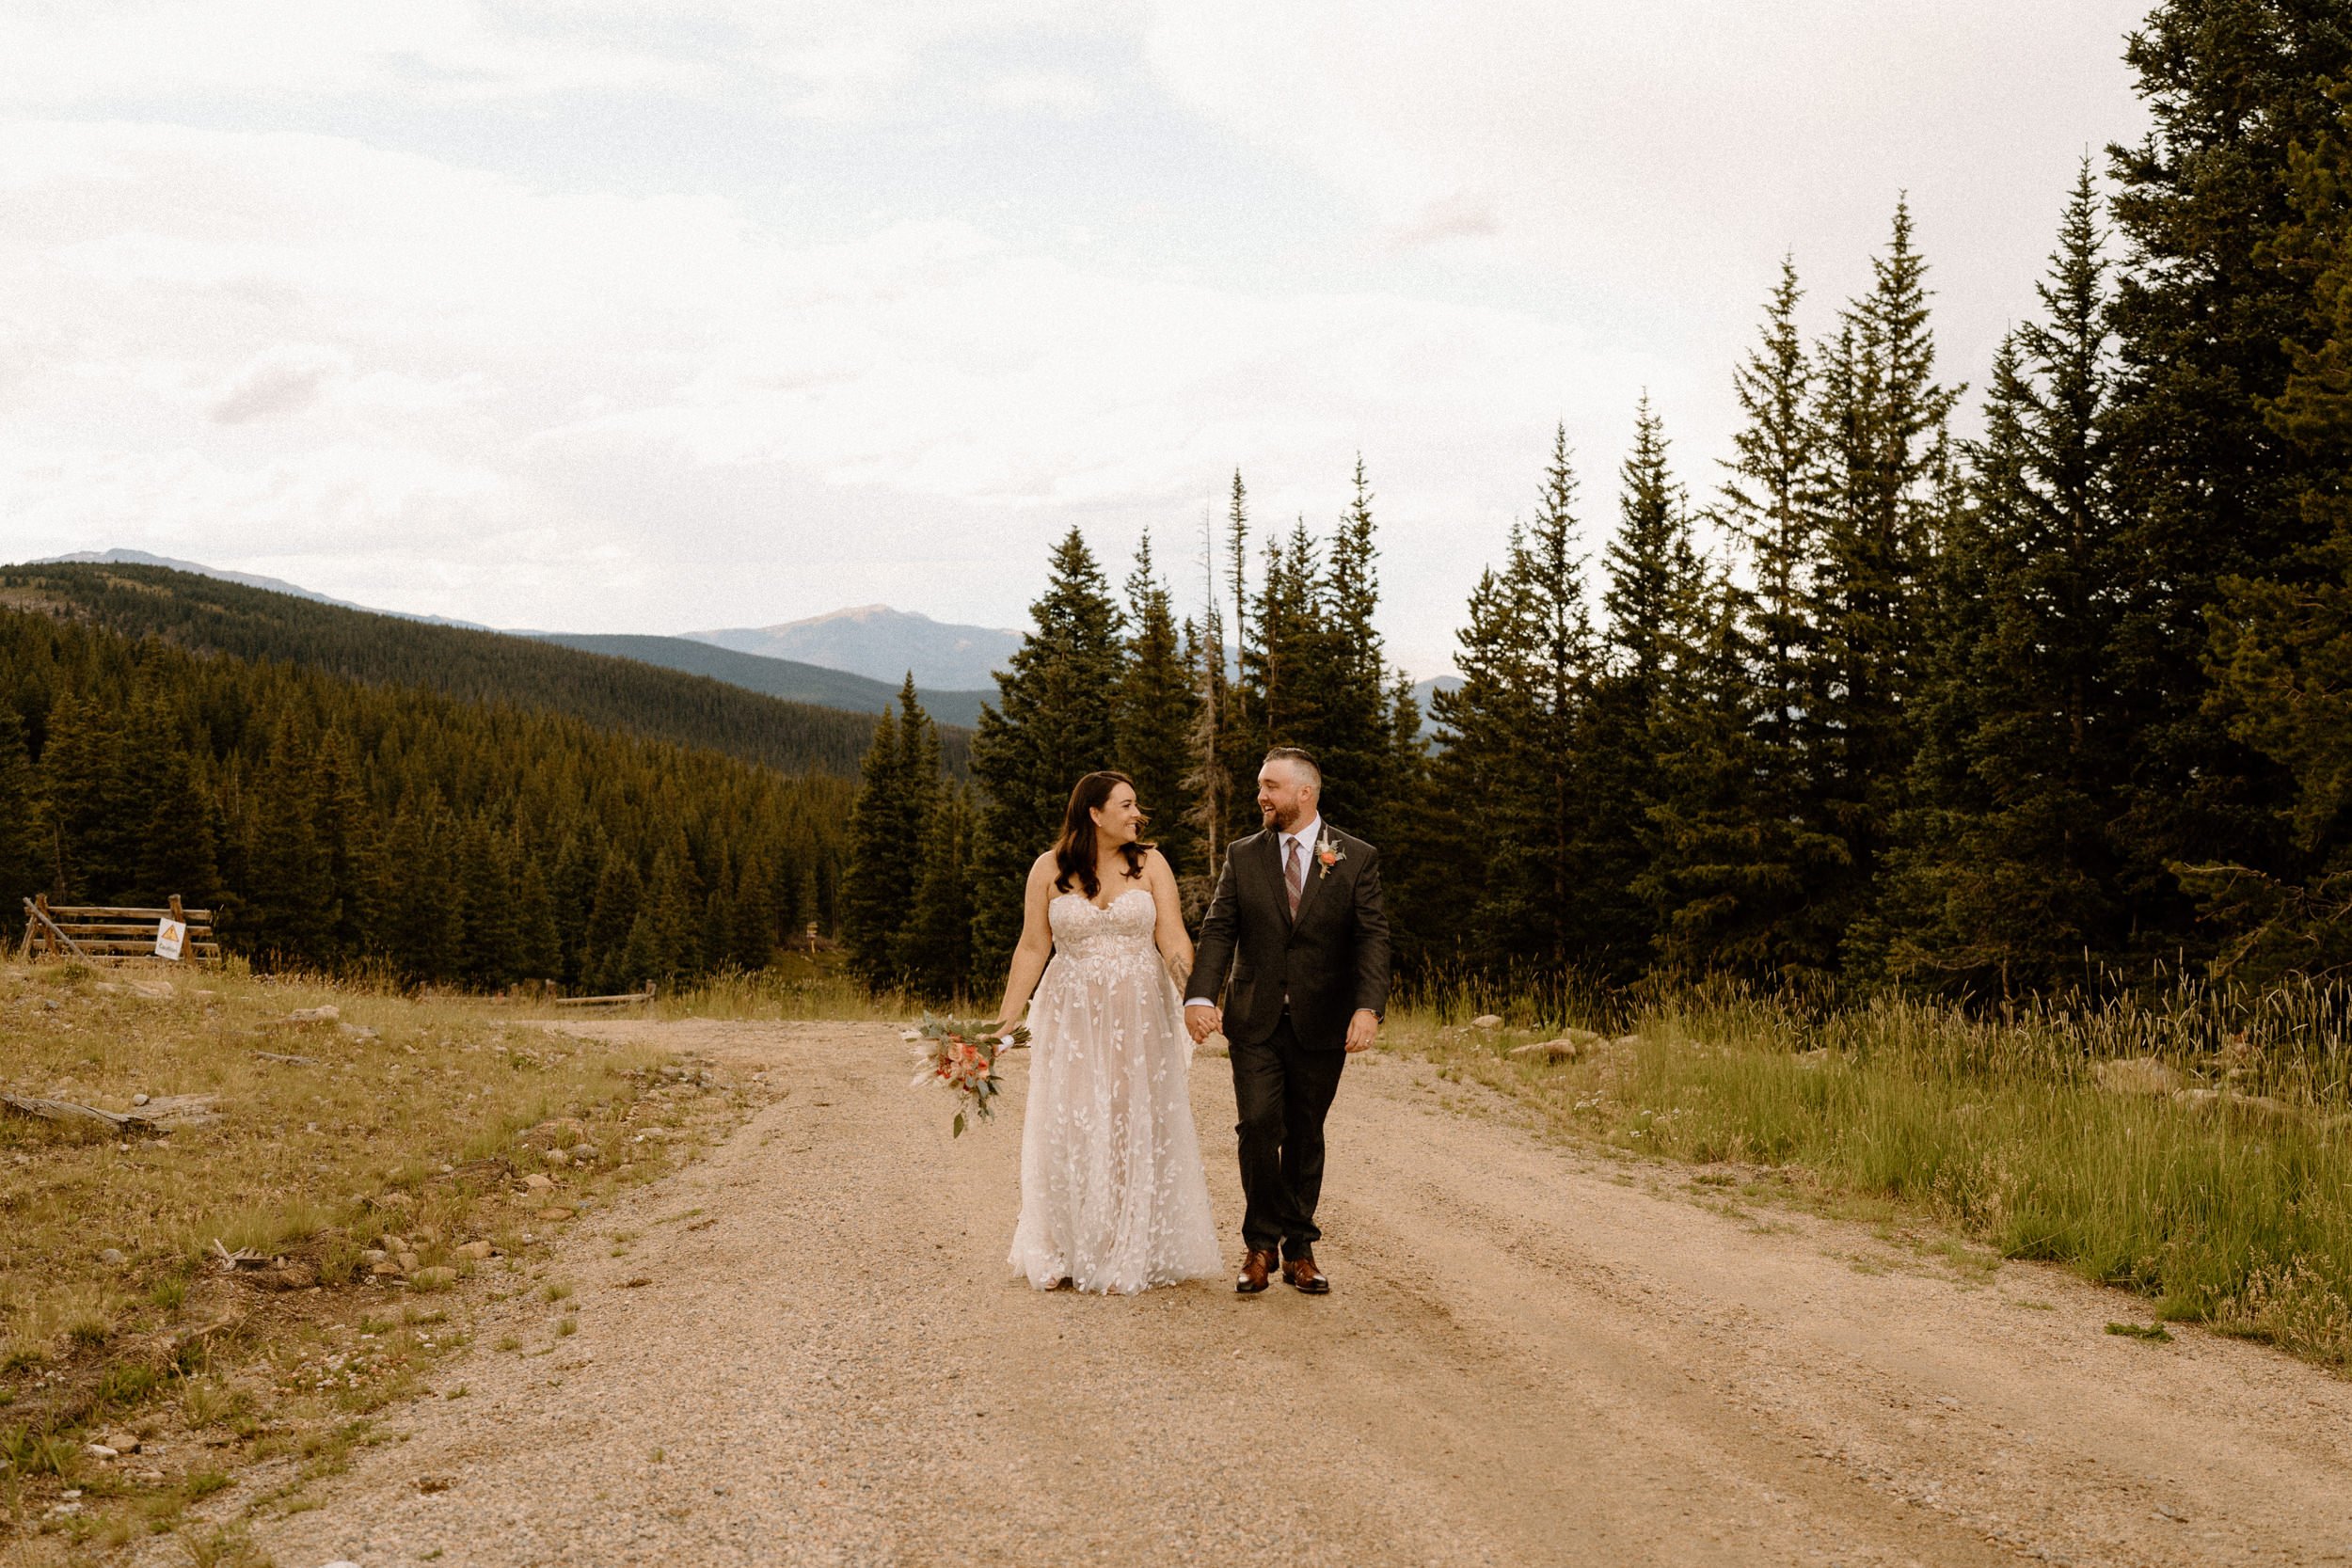 Bride and groom hold hands as they walk down a dirt road